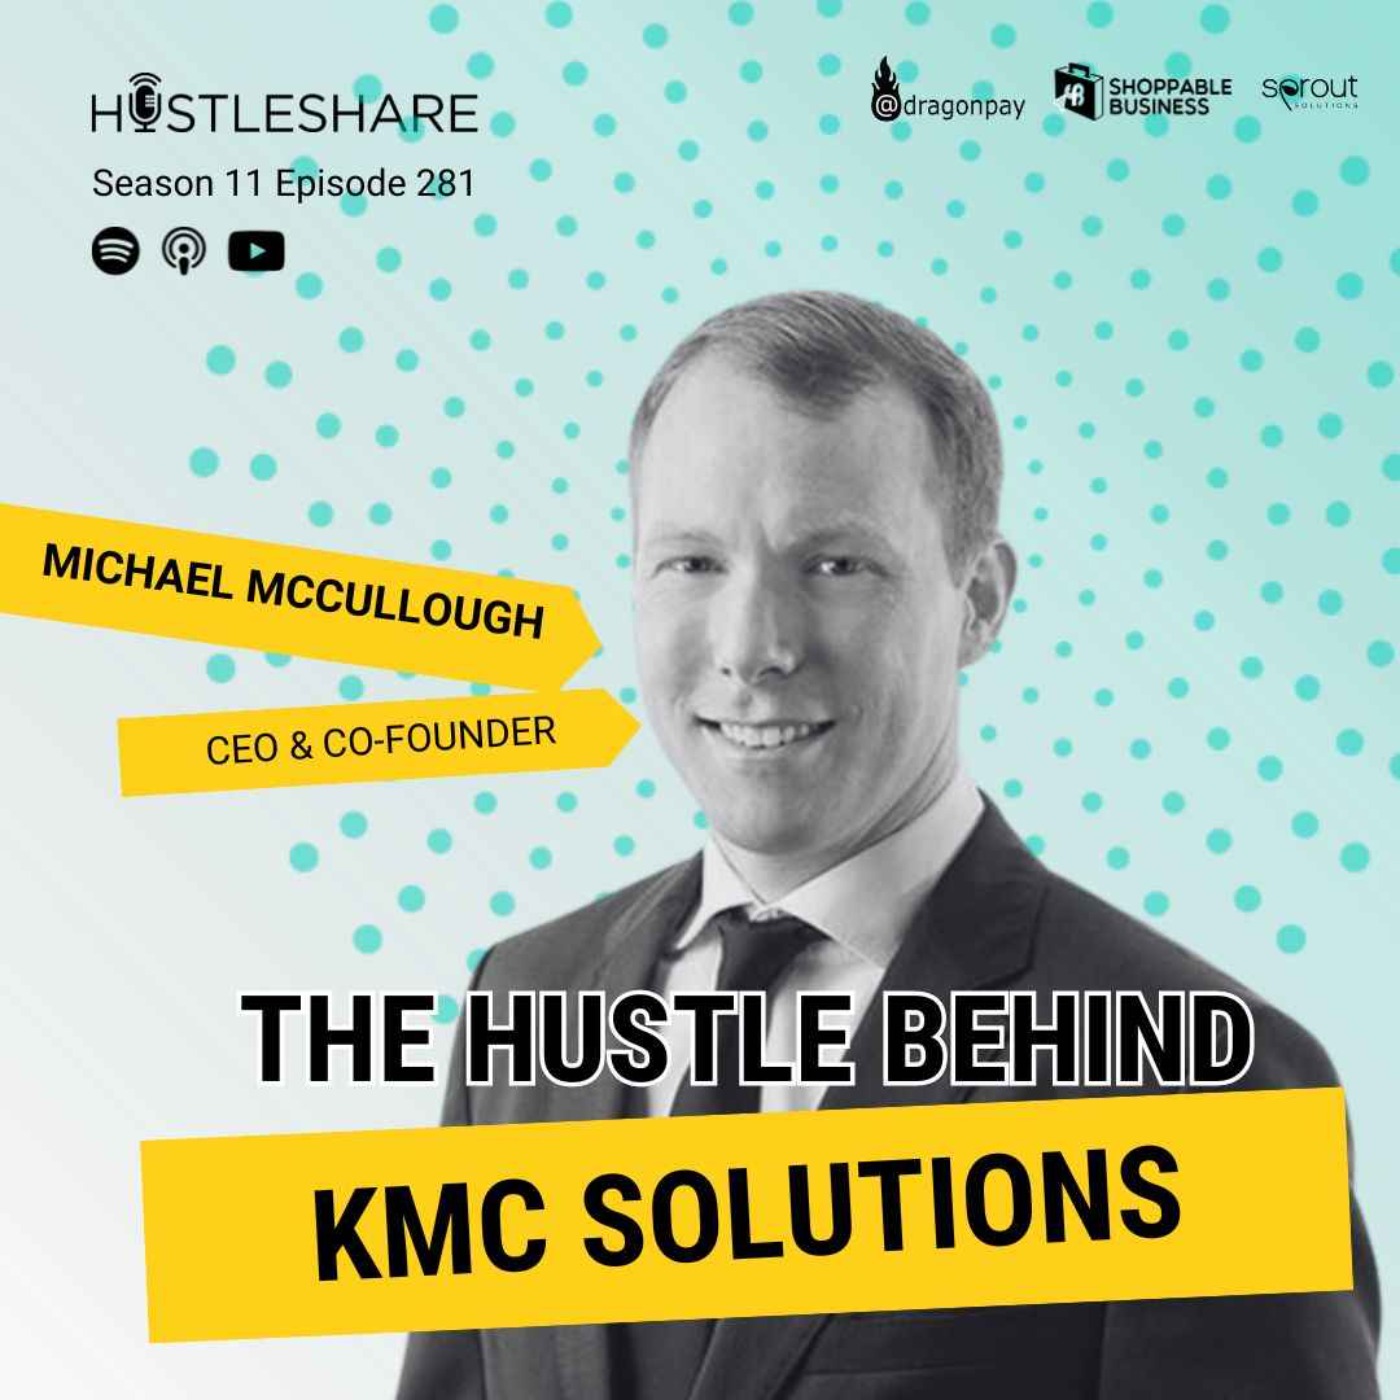 Michael McCullough - The Hustle Behind KMC Solutions